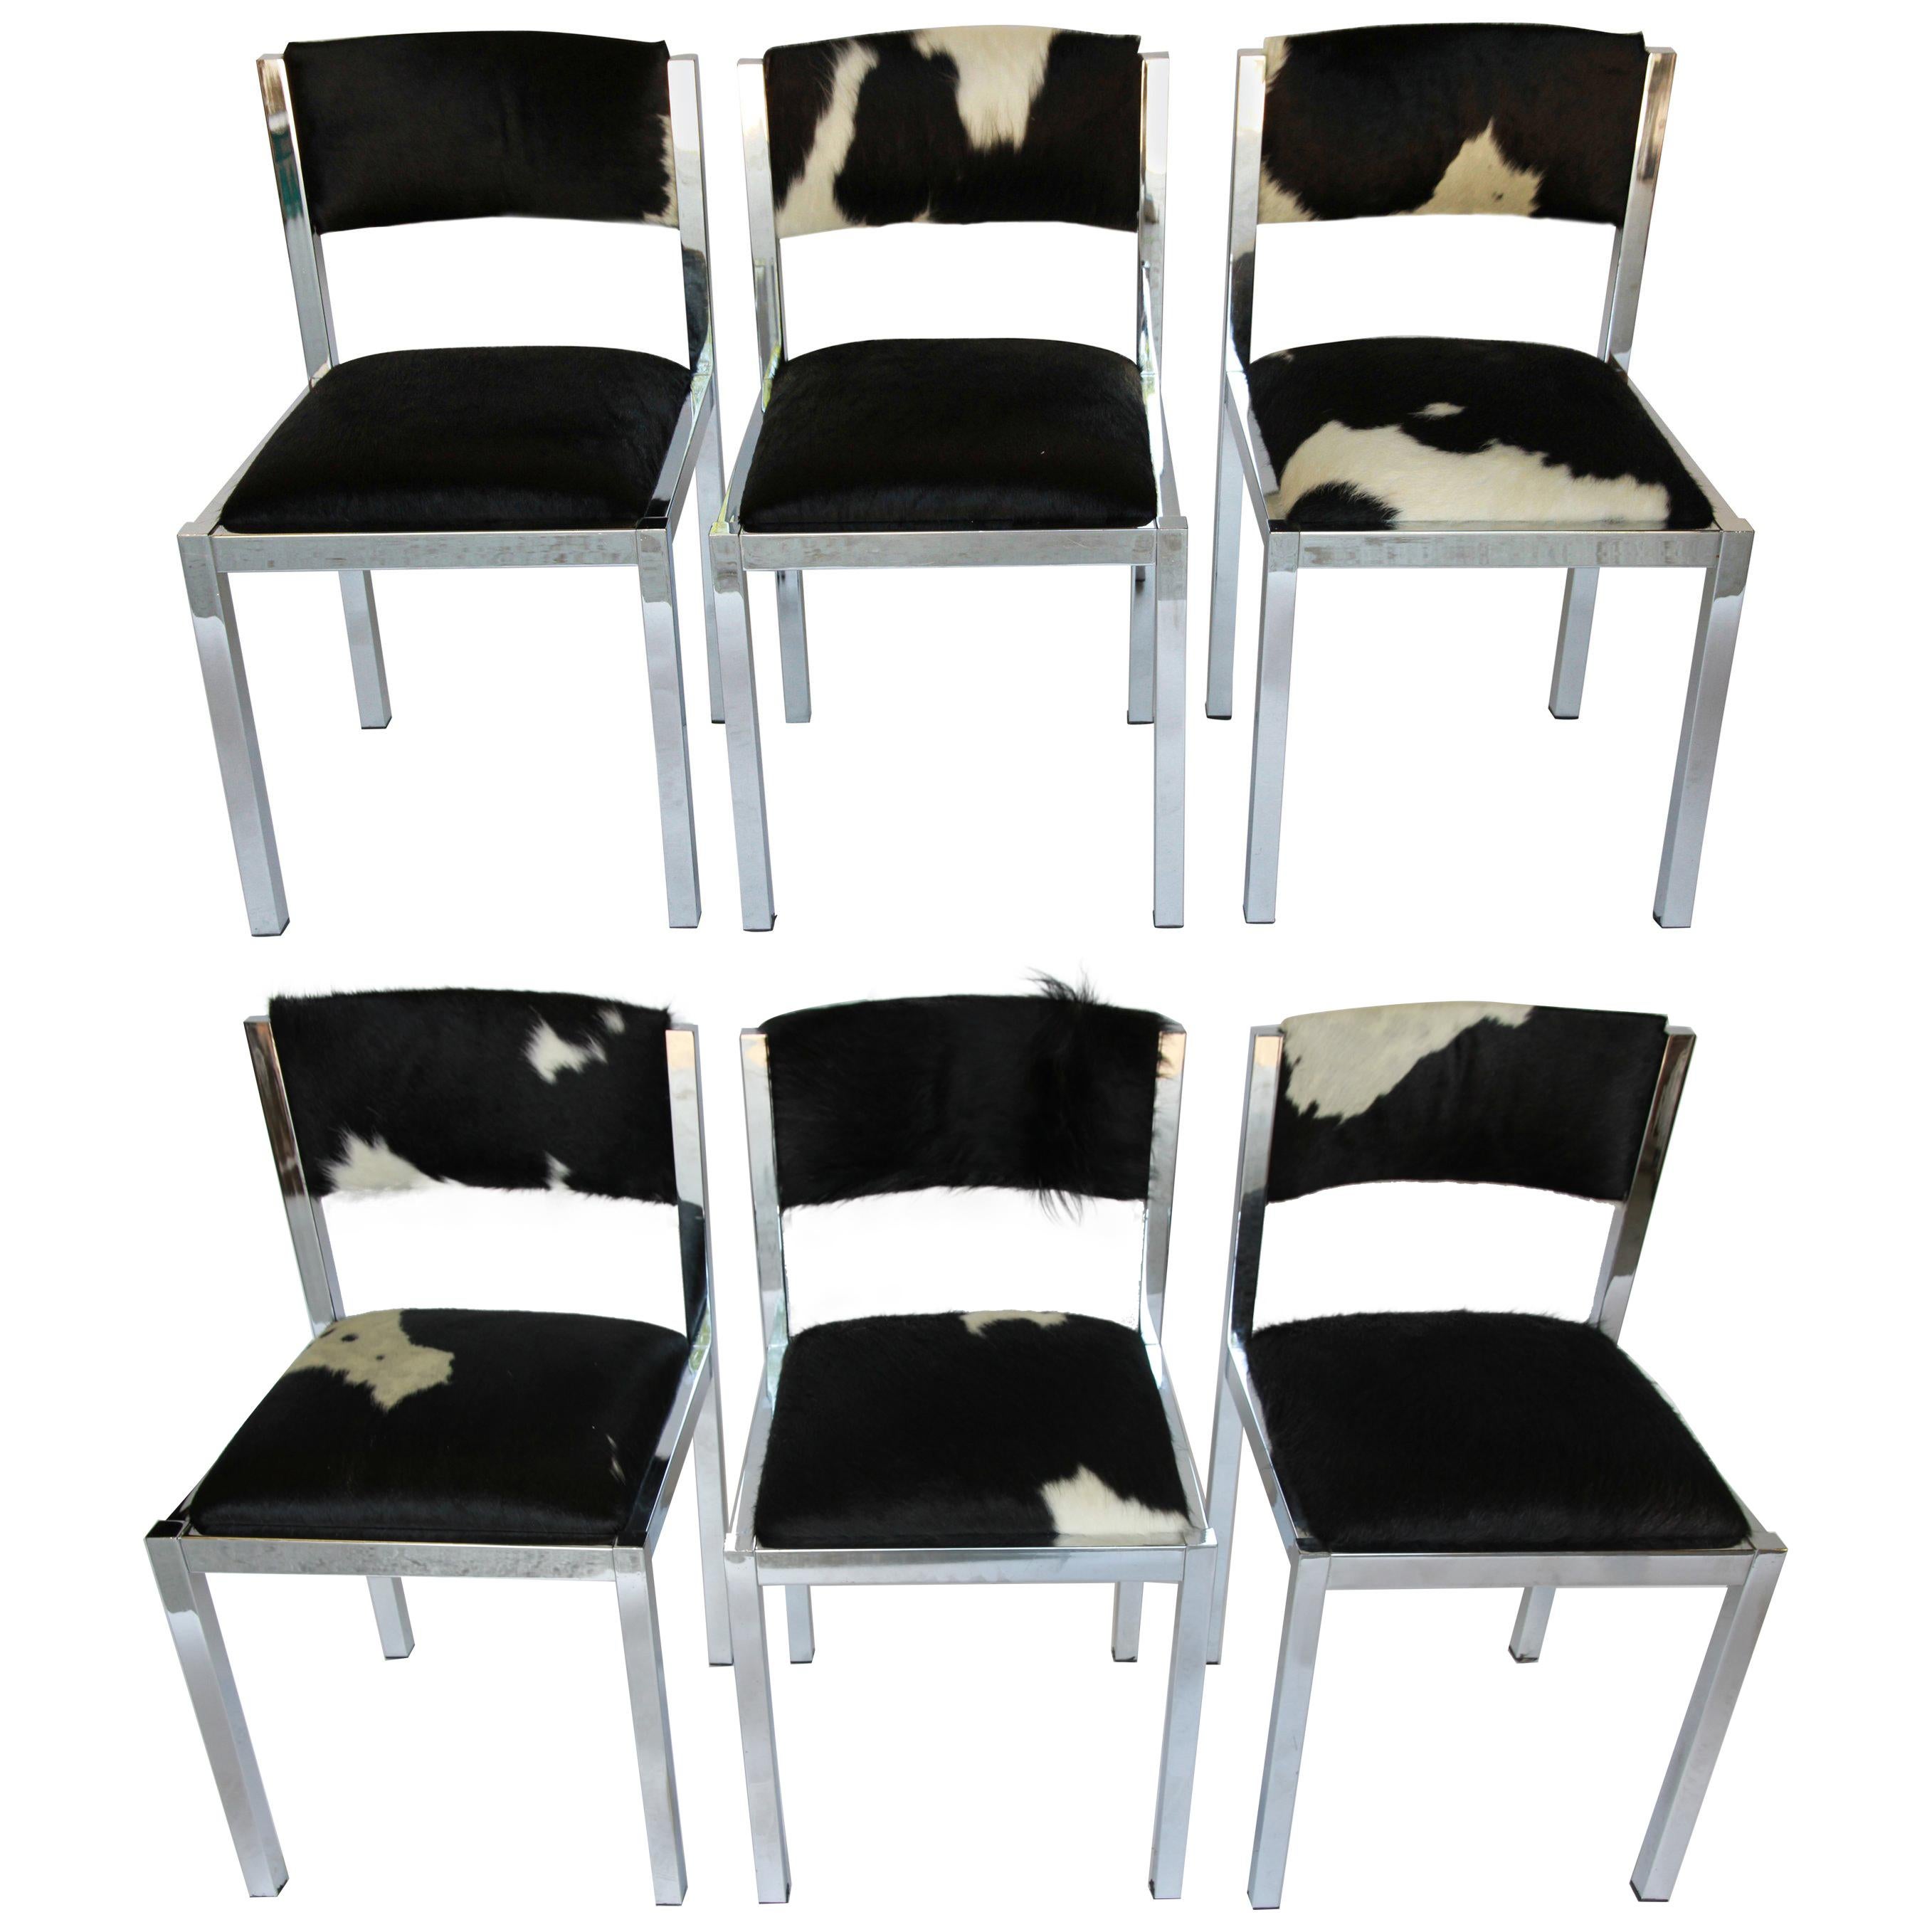 Set of Six Midcentury Chrome Chairs Newly Upholstered in Cowhide